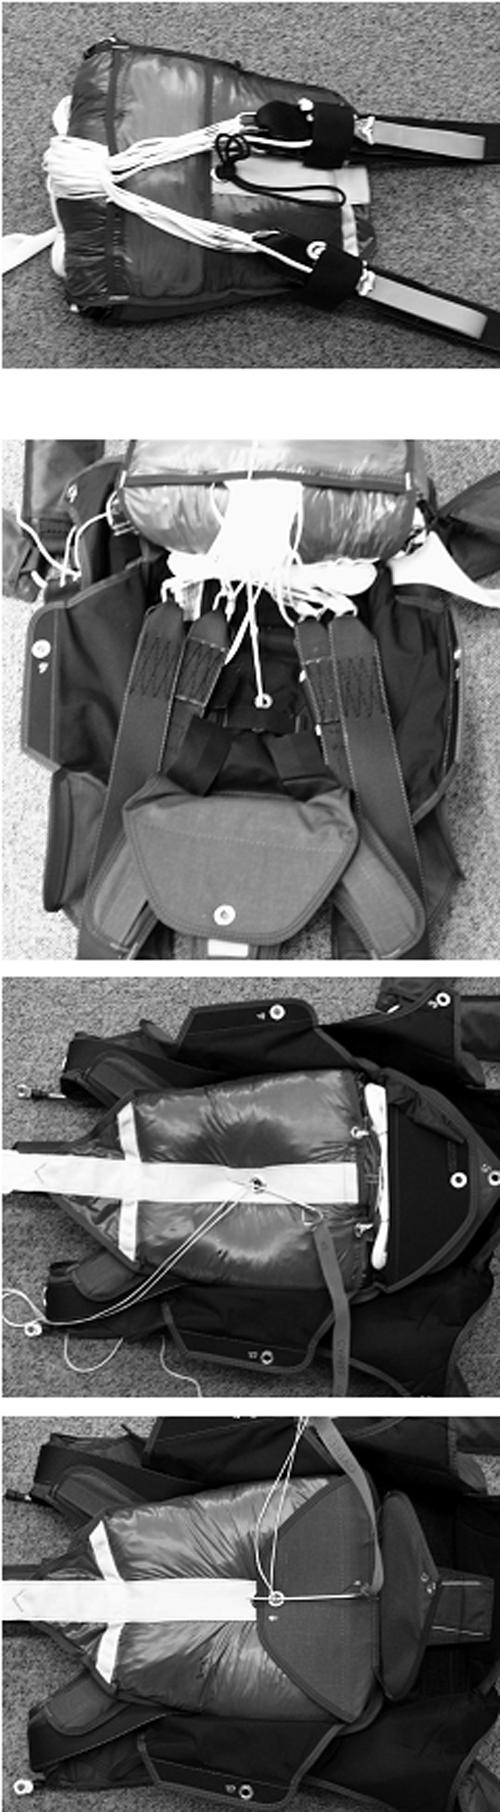 Page: 22 of 65 Loop the suspension lines in the line bag at the bottom of the freebag. Use Velcroprotecting strips so that the lines do not catch on the Velcro of the freebag.